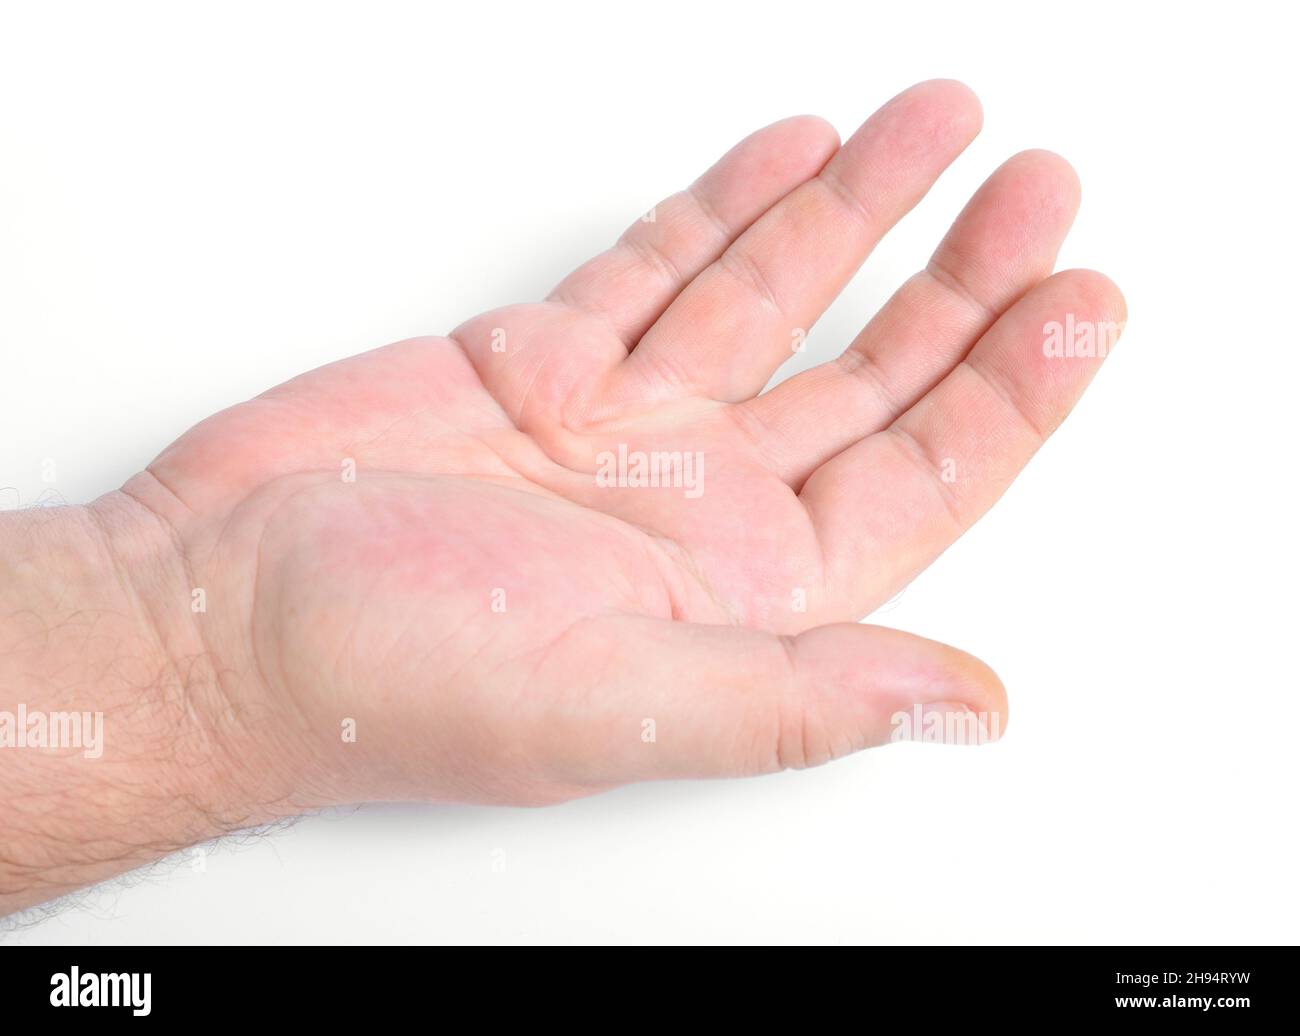 Dupuytren's contracture, also called Dupuytren's disease, Morbus Dupuytren, Viking disease, and Celtic hand. On white background. Stock Photo